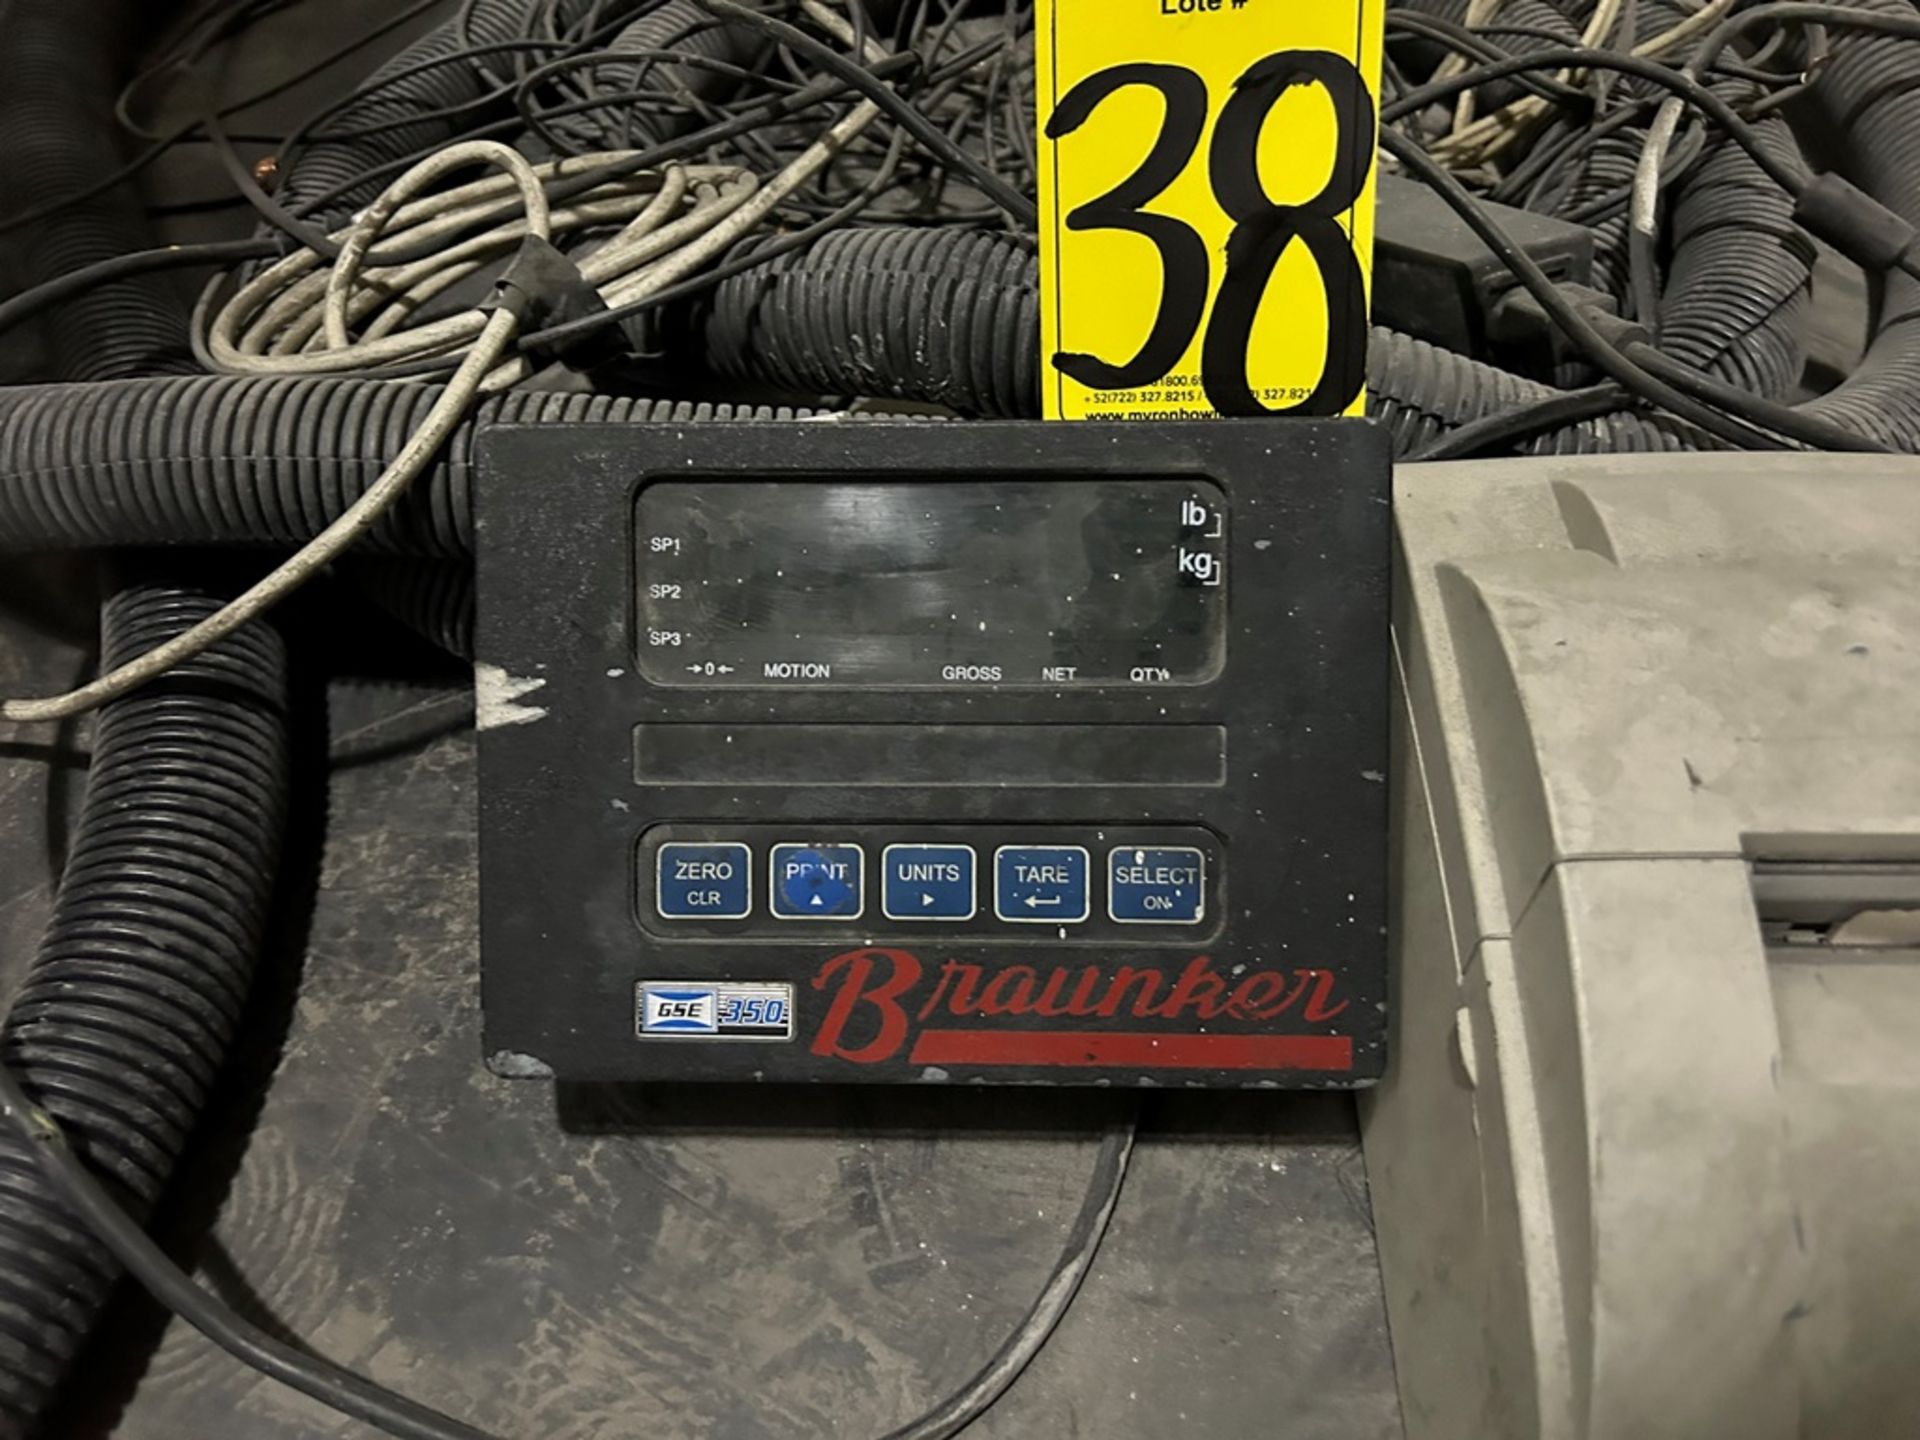 Braunker Floor Scale, Model 350, Serial No. 964175, Year ND, 110V, Maximum capacity 1 ton. / Bascul - Image 6 of 9